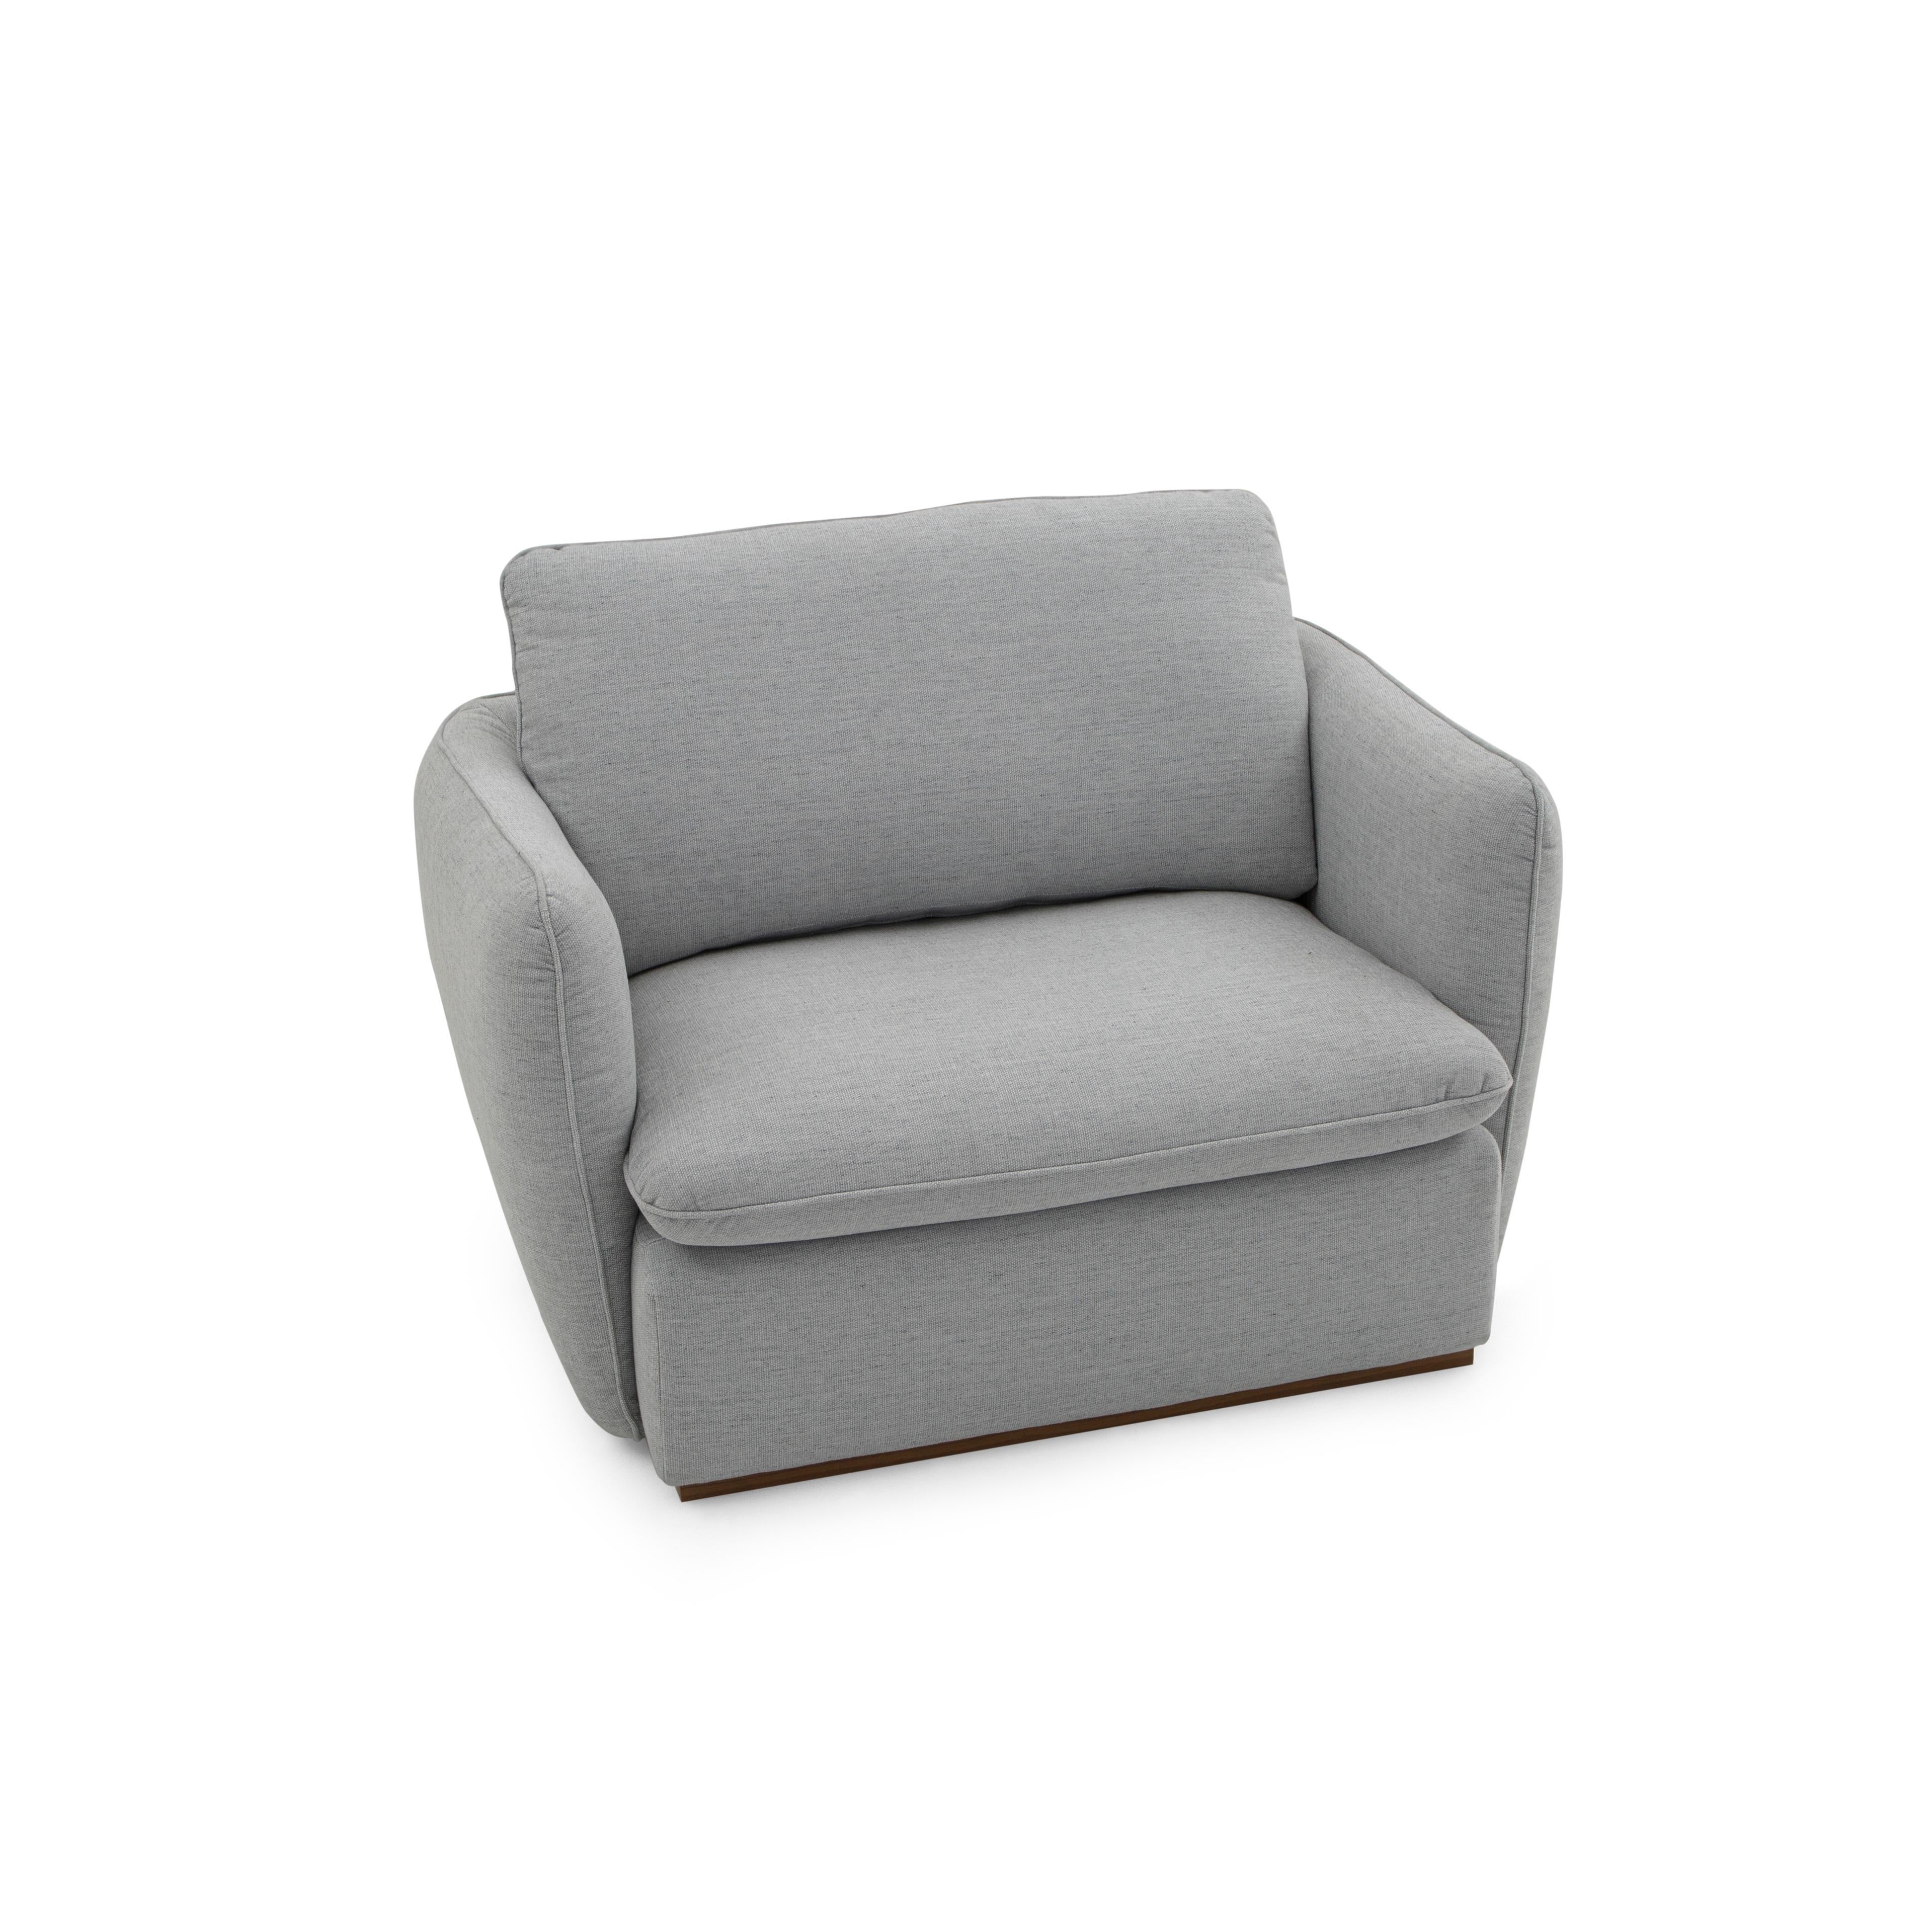 The Kolo armchair upholstered in a light gray fabric is here for you and your family. As relaxing as it looks, the actual sit is even better. Complete with padded arms, this armchair is the perfect complement to a room used by the entire family and